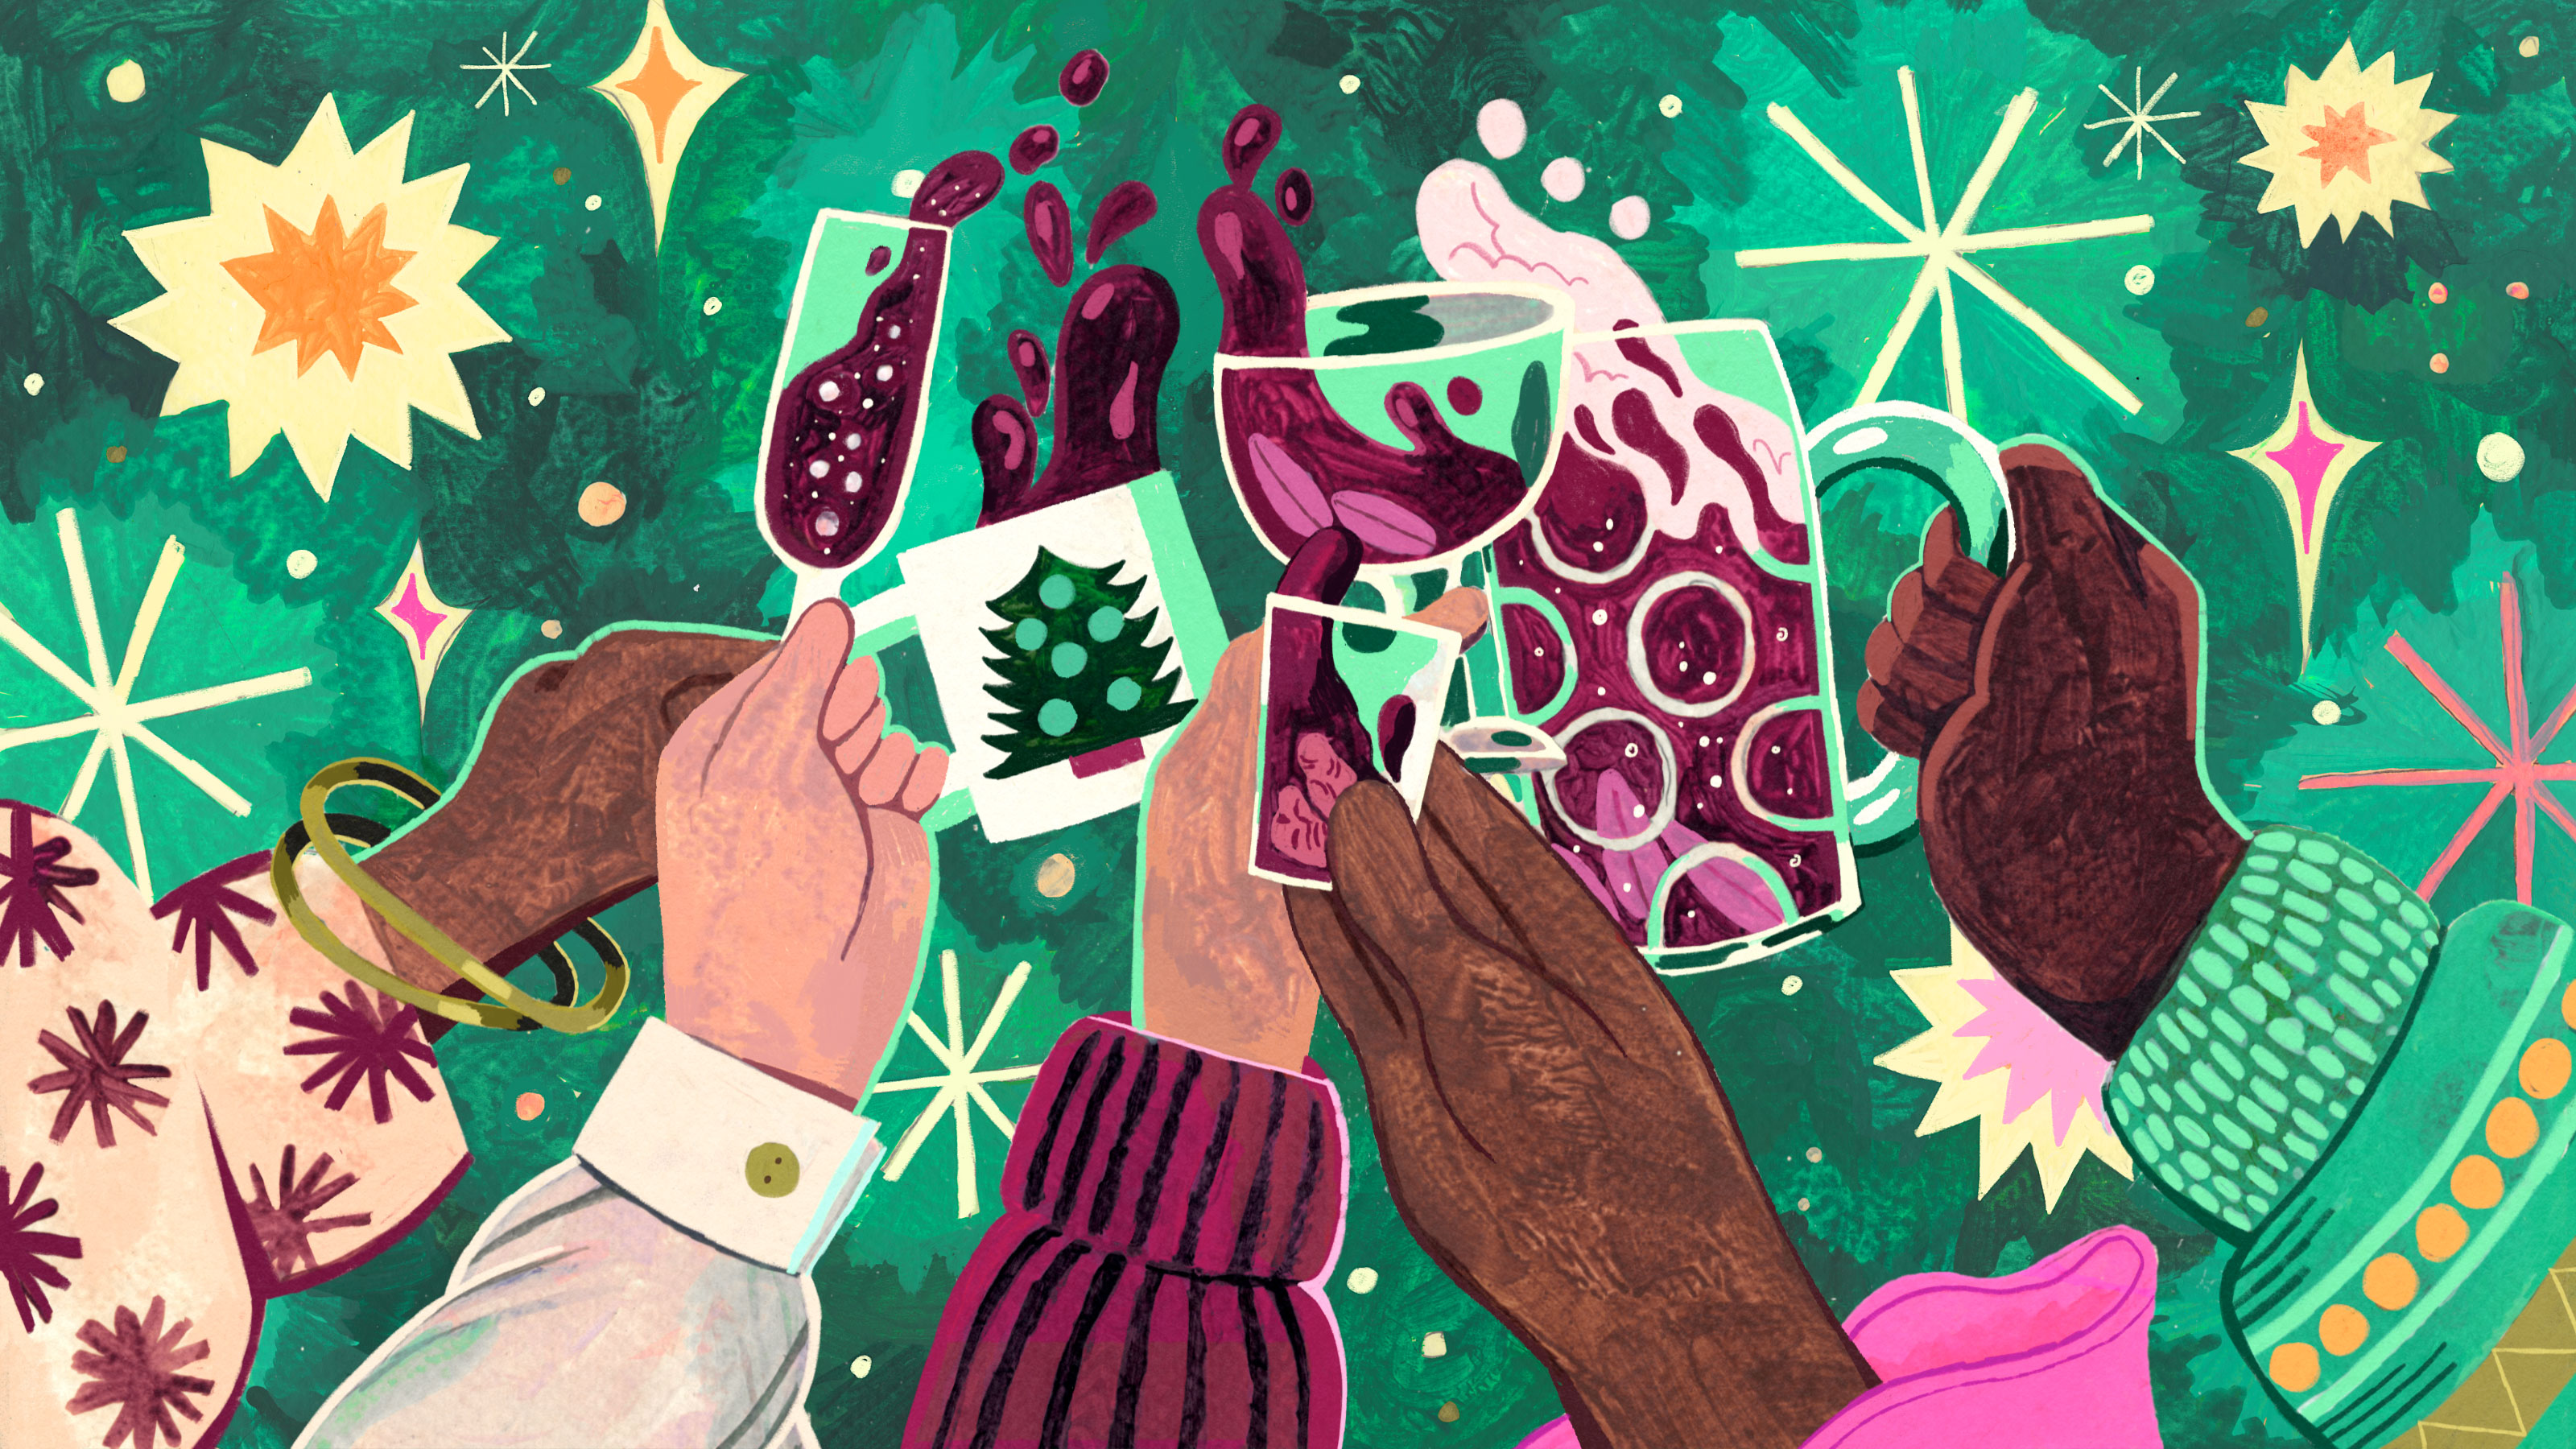 A crowd of hands grasp mugs, cups, and goblets sloshing with purple liquid, on an abstract green holiday background.